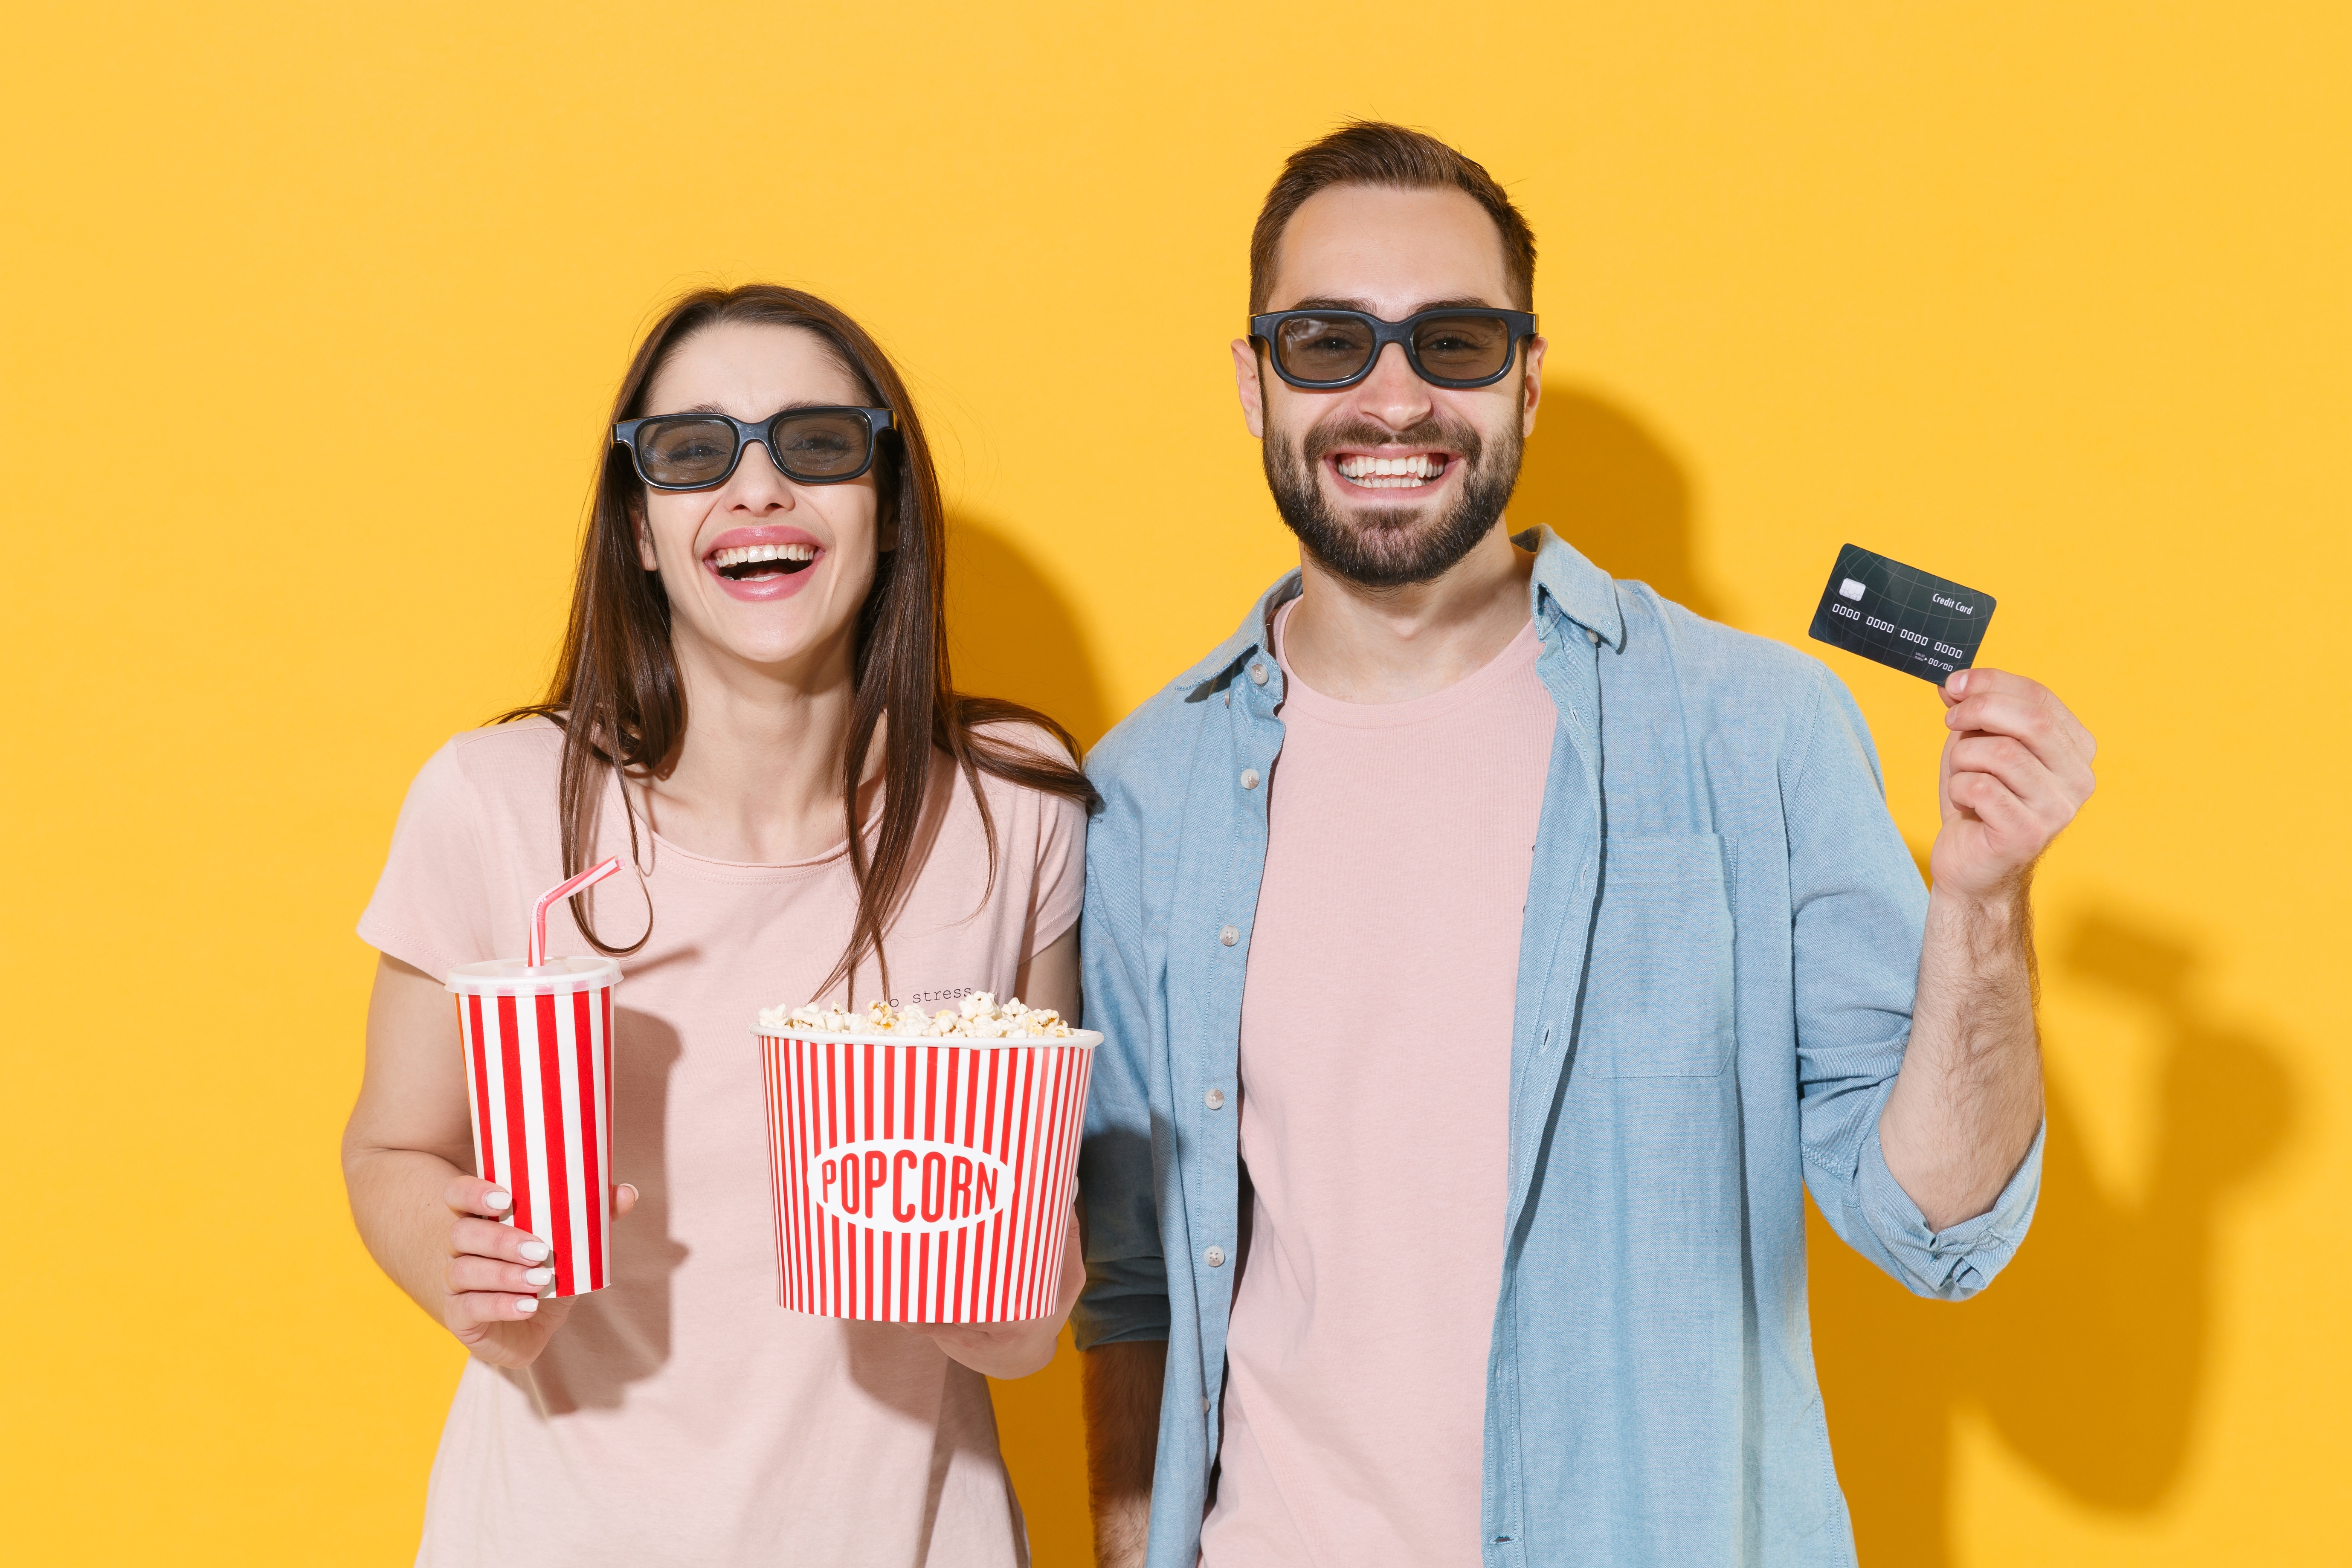 two moviegoers with credit card and pop corn in hand